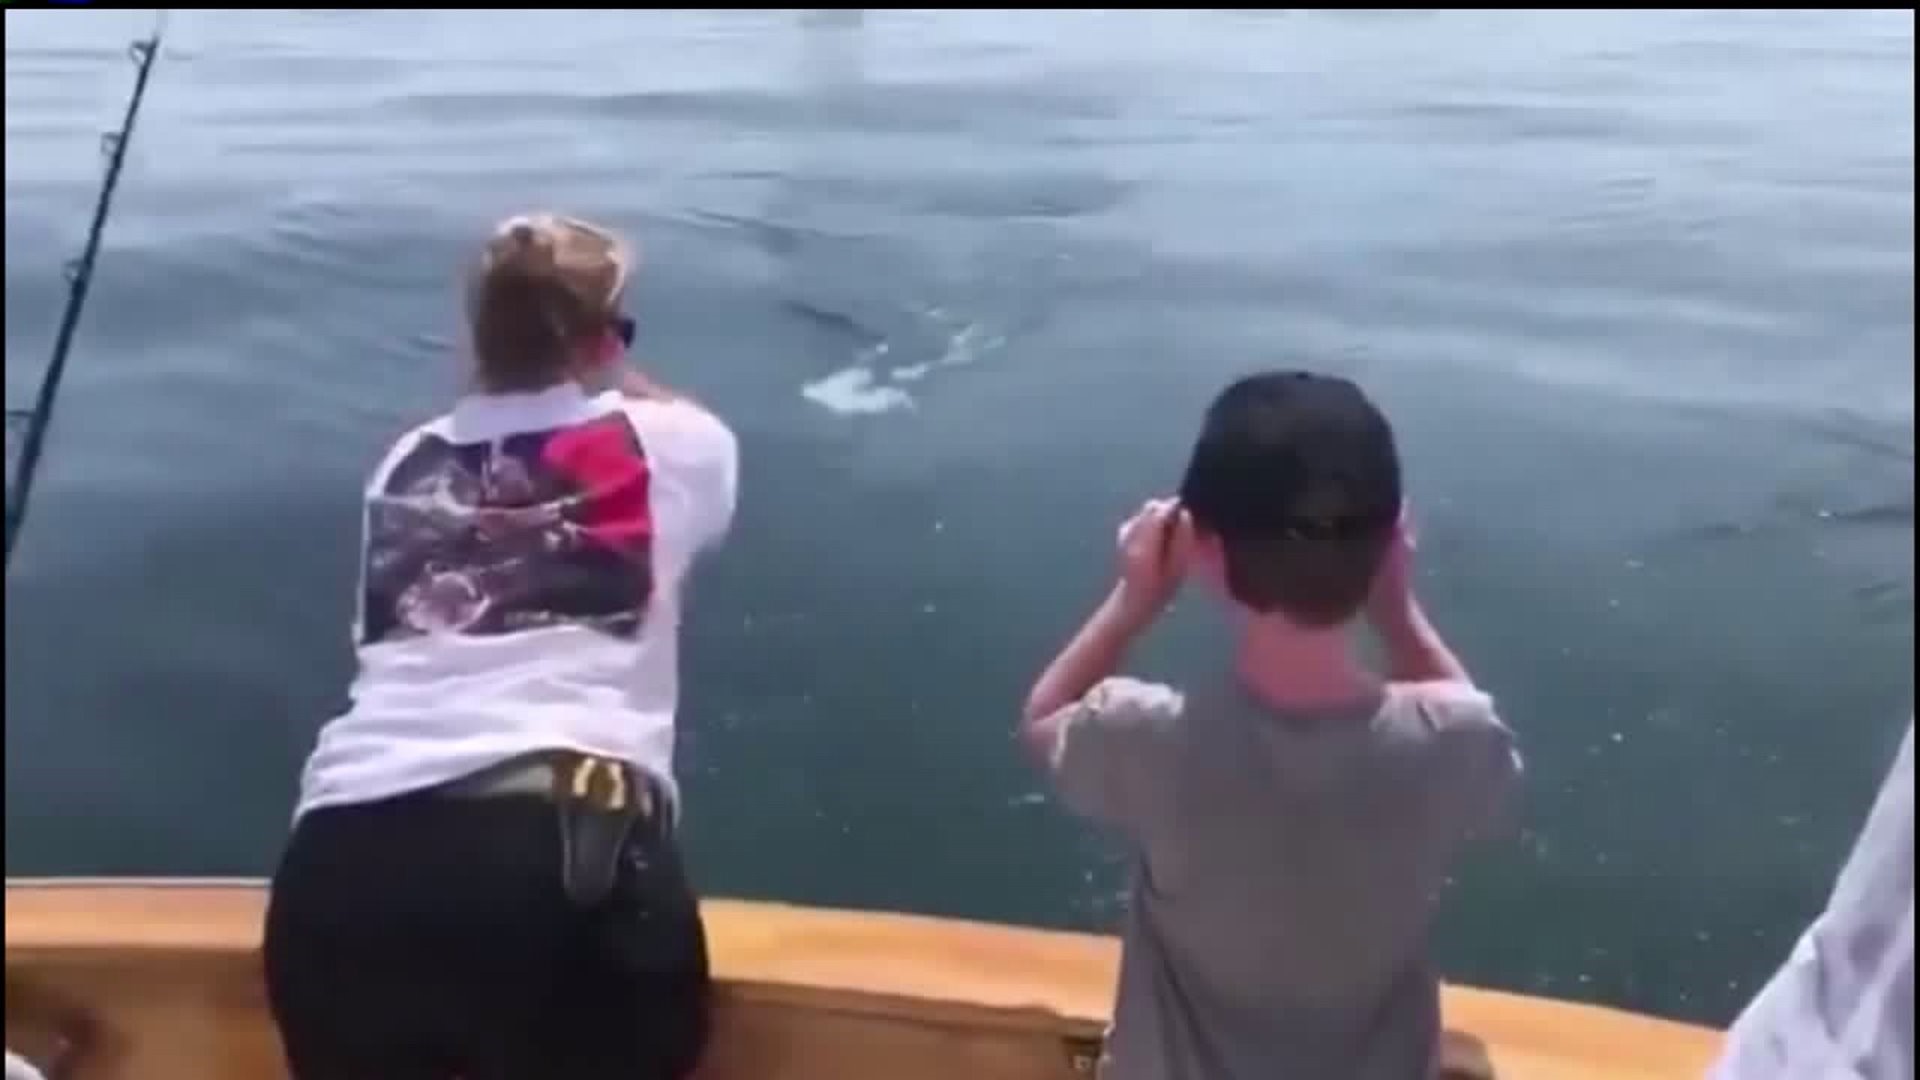 A great white shark jumped in front of a boat near Cape Cod, surprising those on board